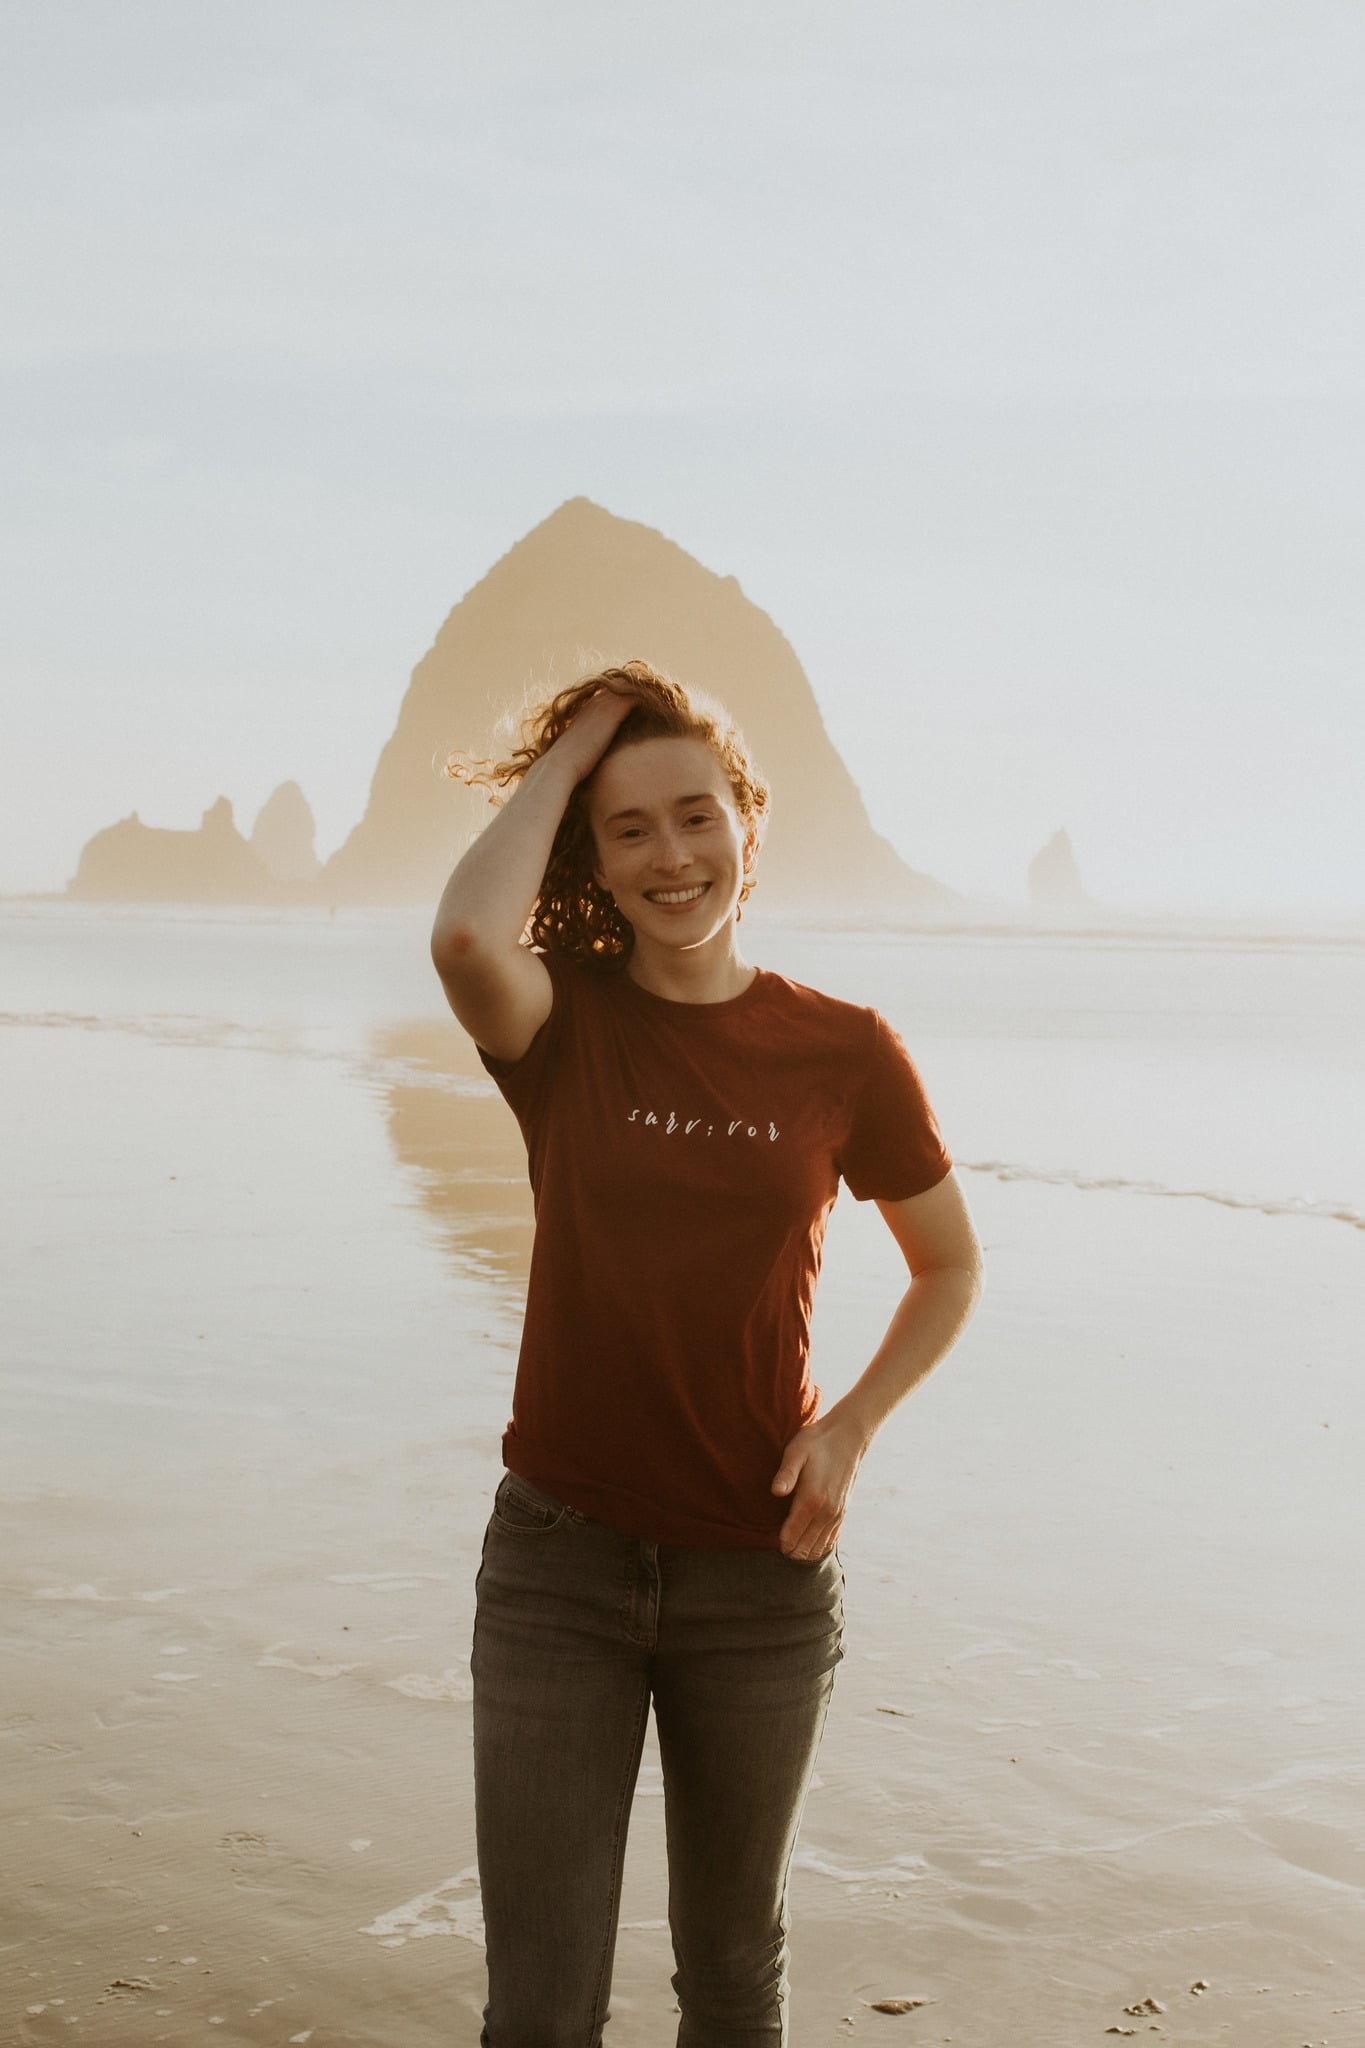 Jessi Beyer, founder of Mental Health Apparel Brand - How to Heal Co., smiling at the beach